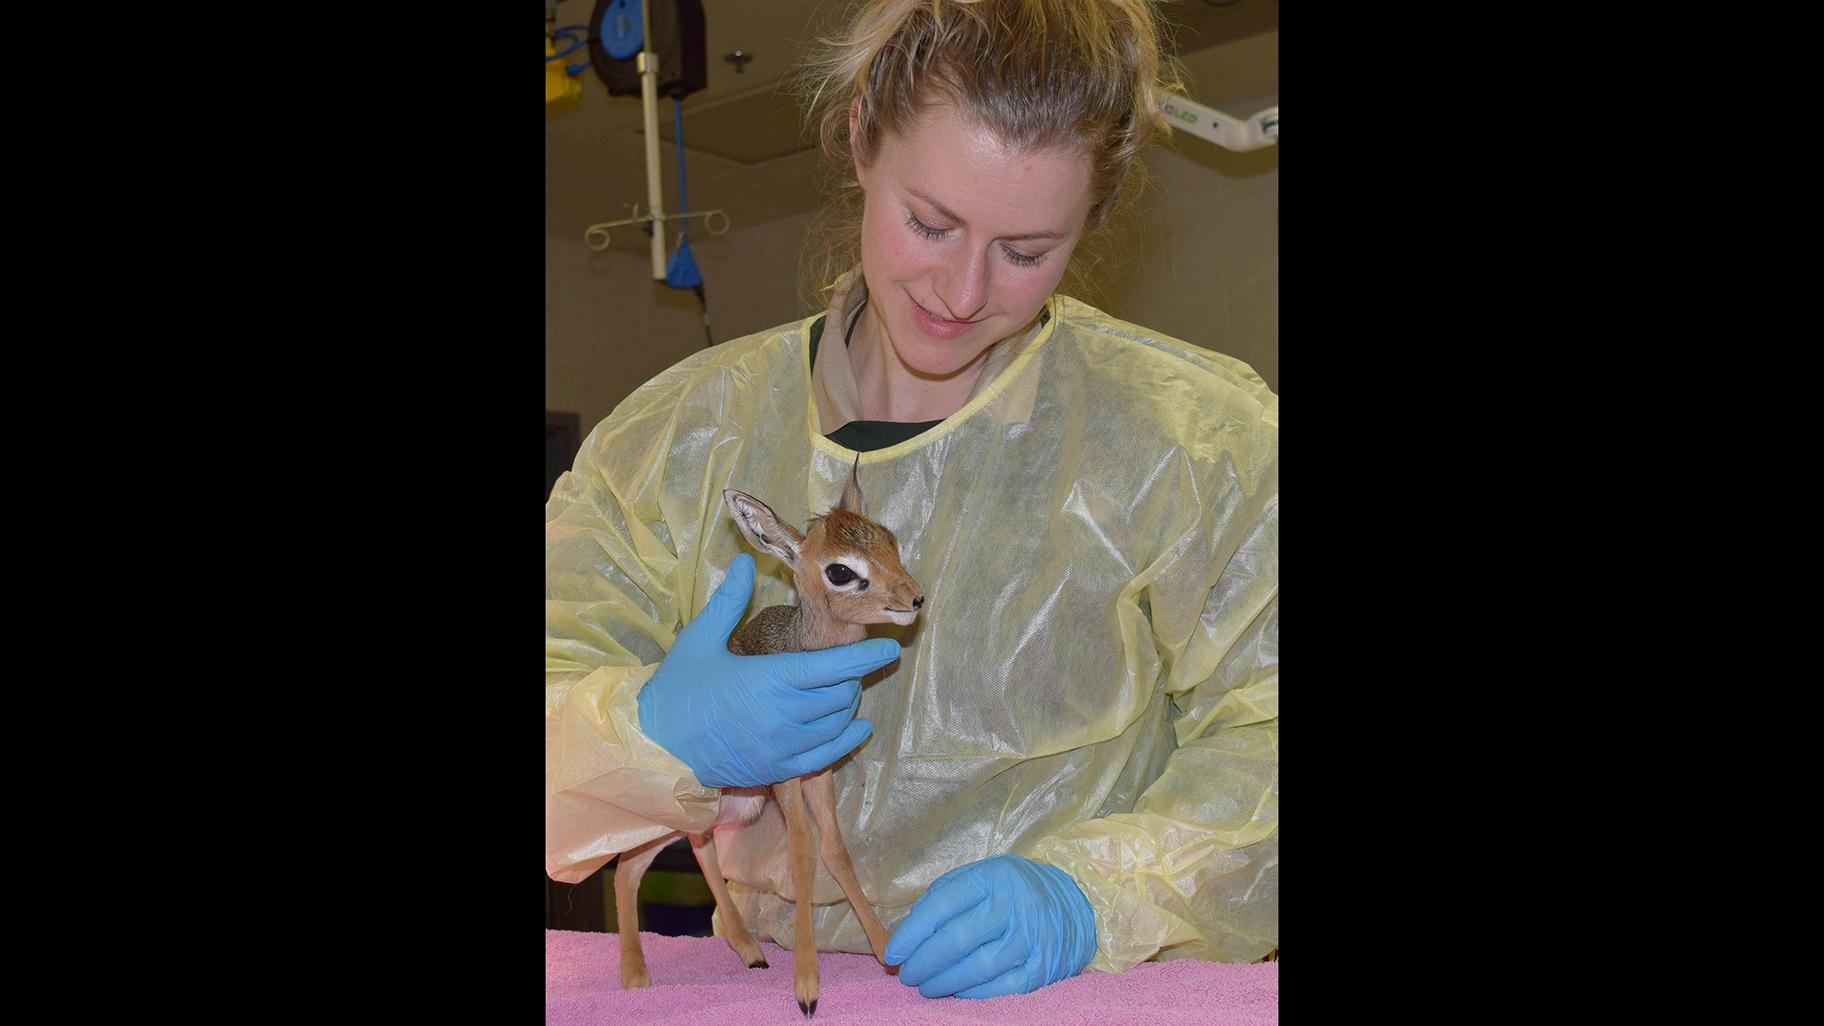 Alicia Grano, an animal care specialist at Brookfield Zoo, with Valentino, a Kirk’s dik-dik antelope (Cathy Bazzoni / Chicago Zoological Society)